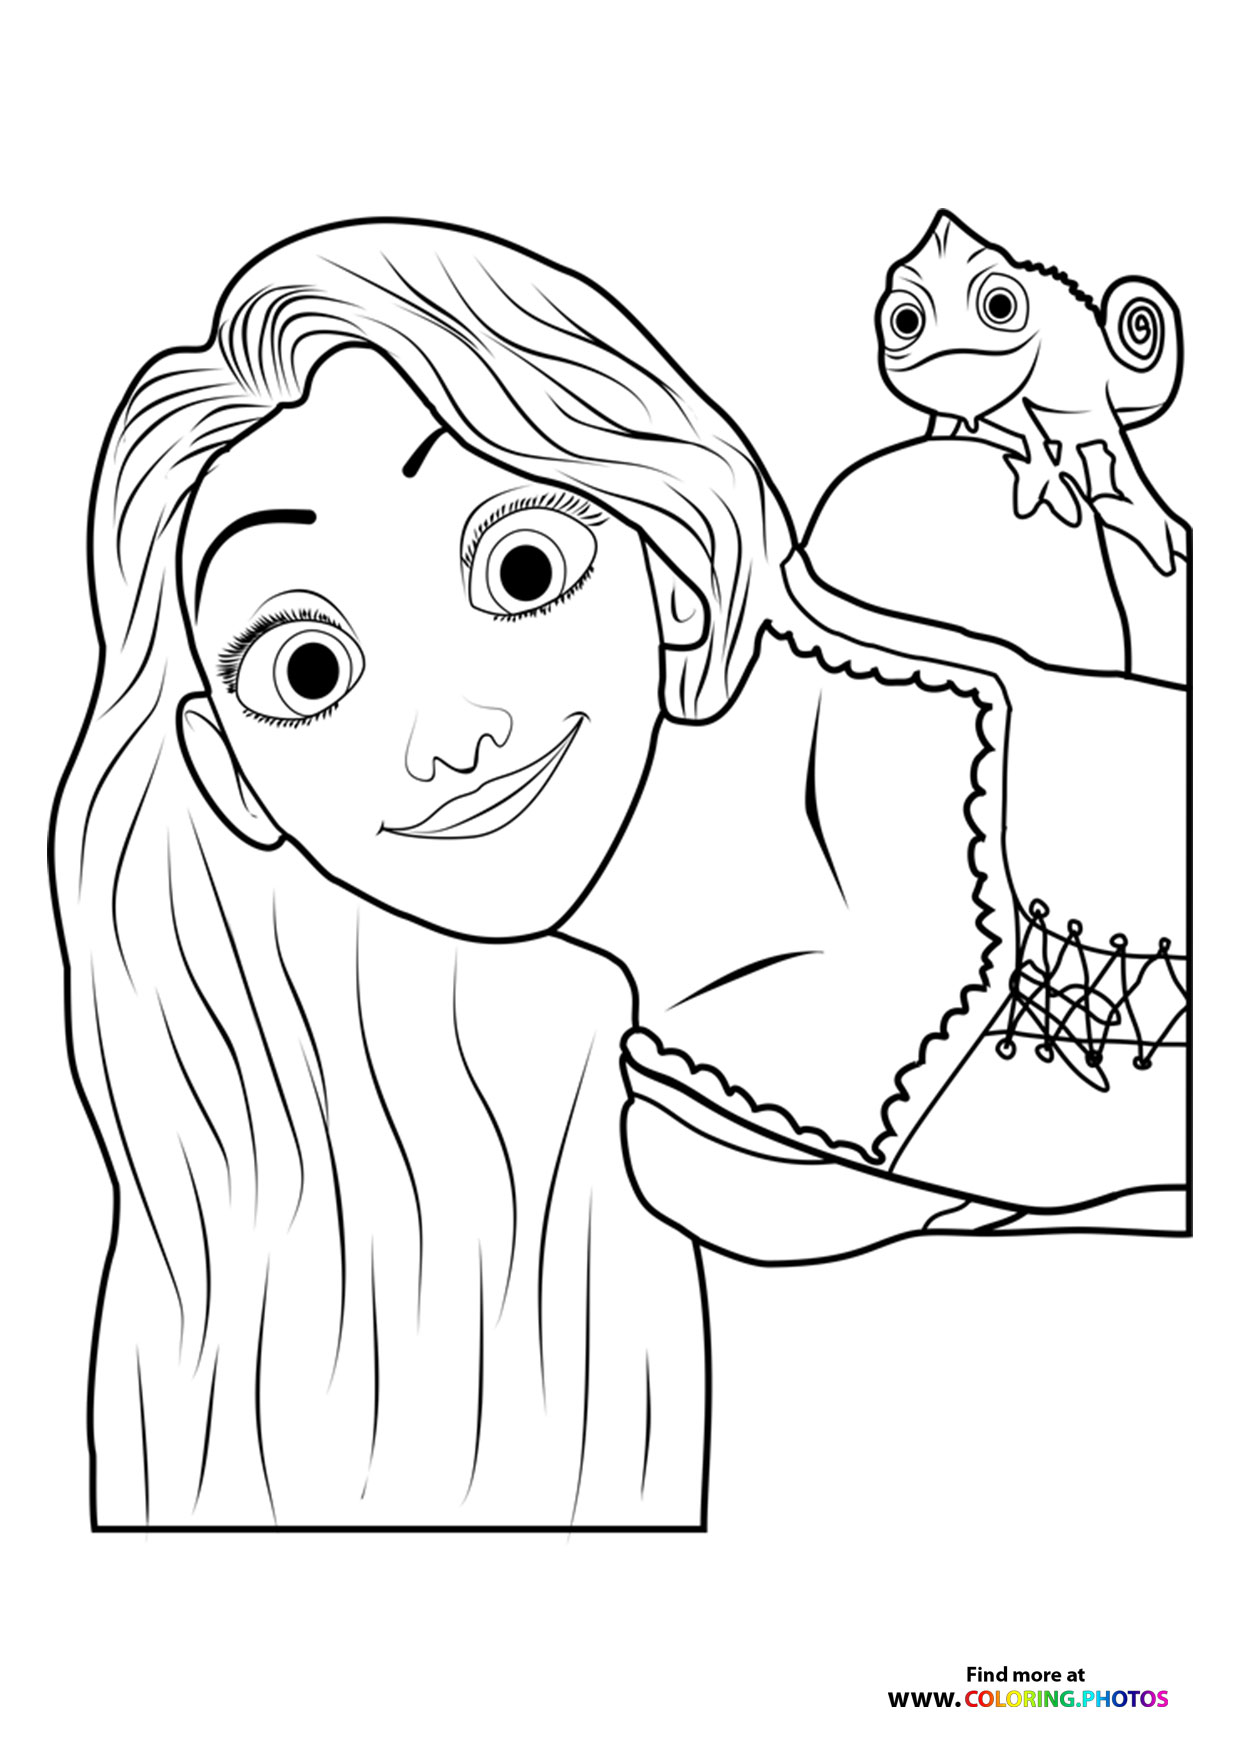 disney tangled rapunzel coloring pages